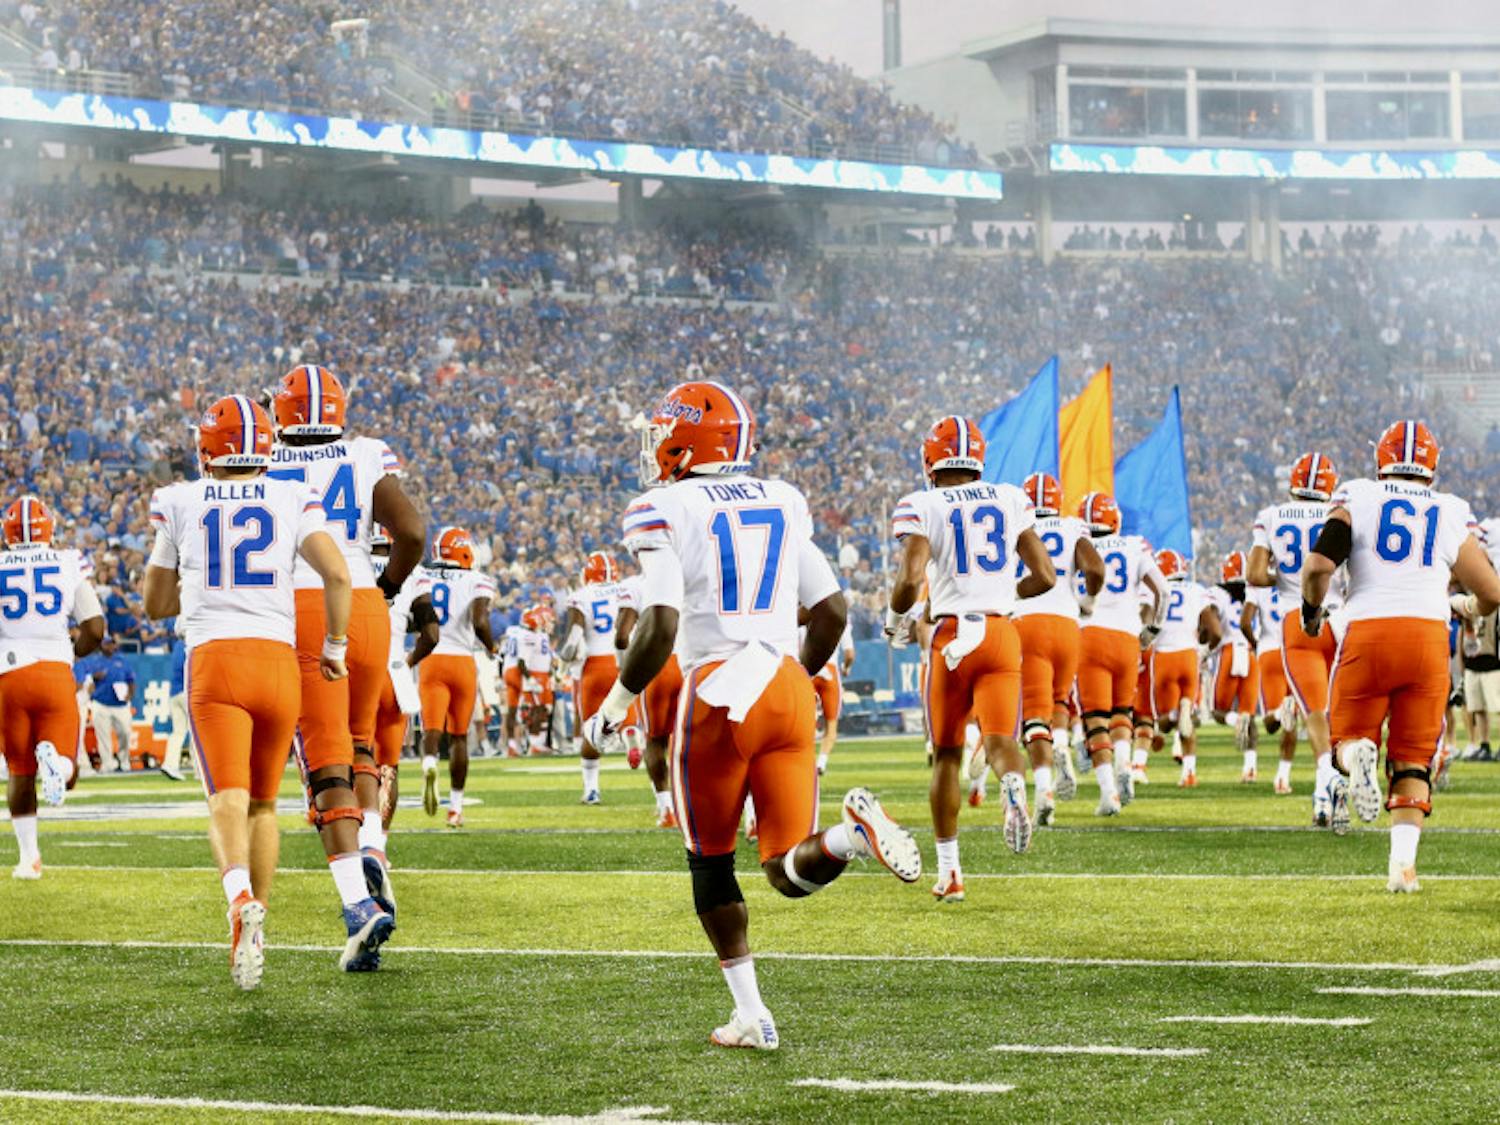 The Gators went 4-7 in 2017. 